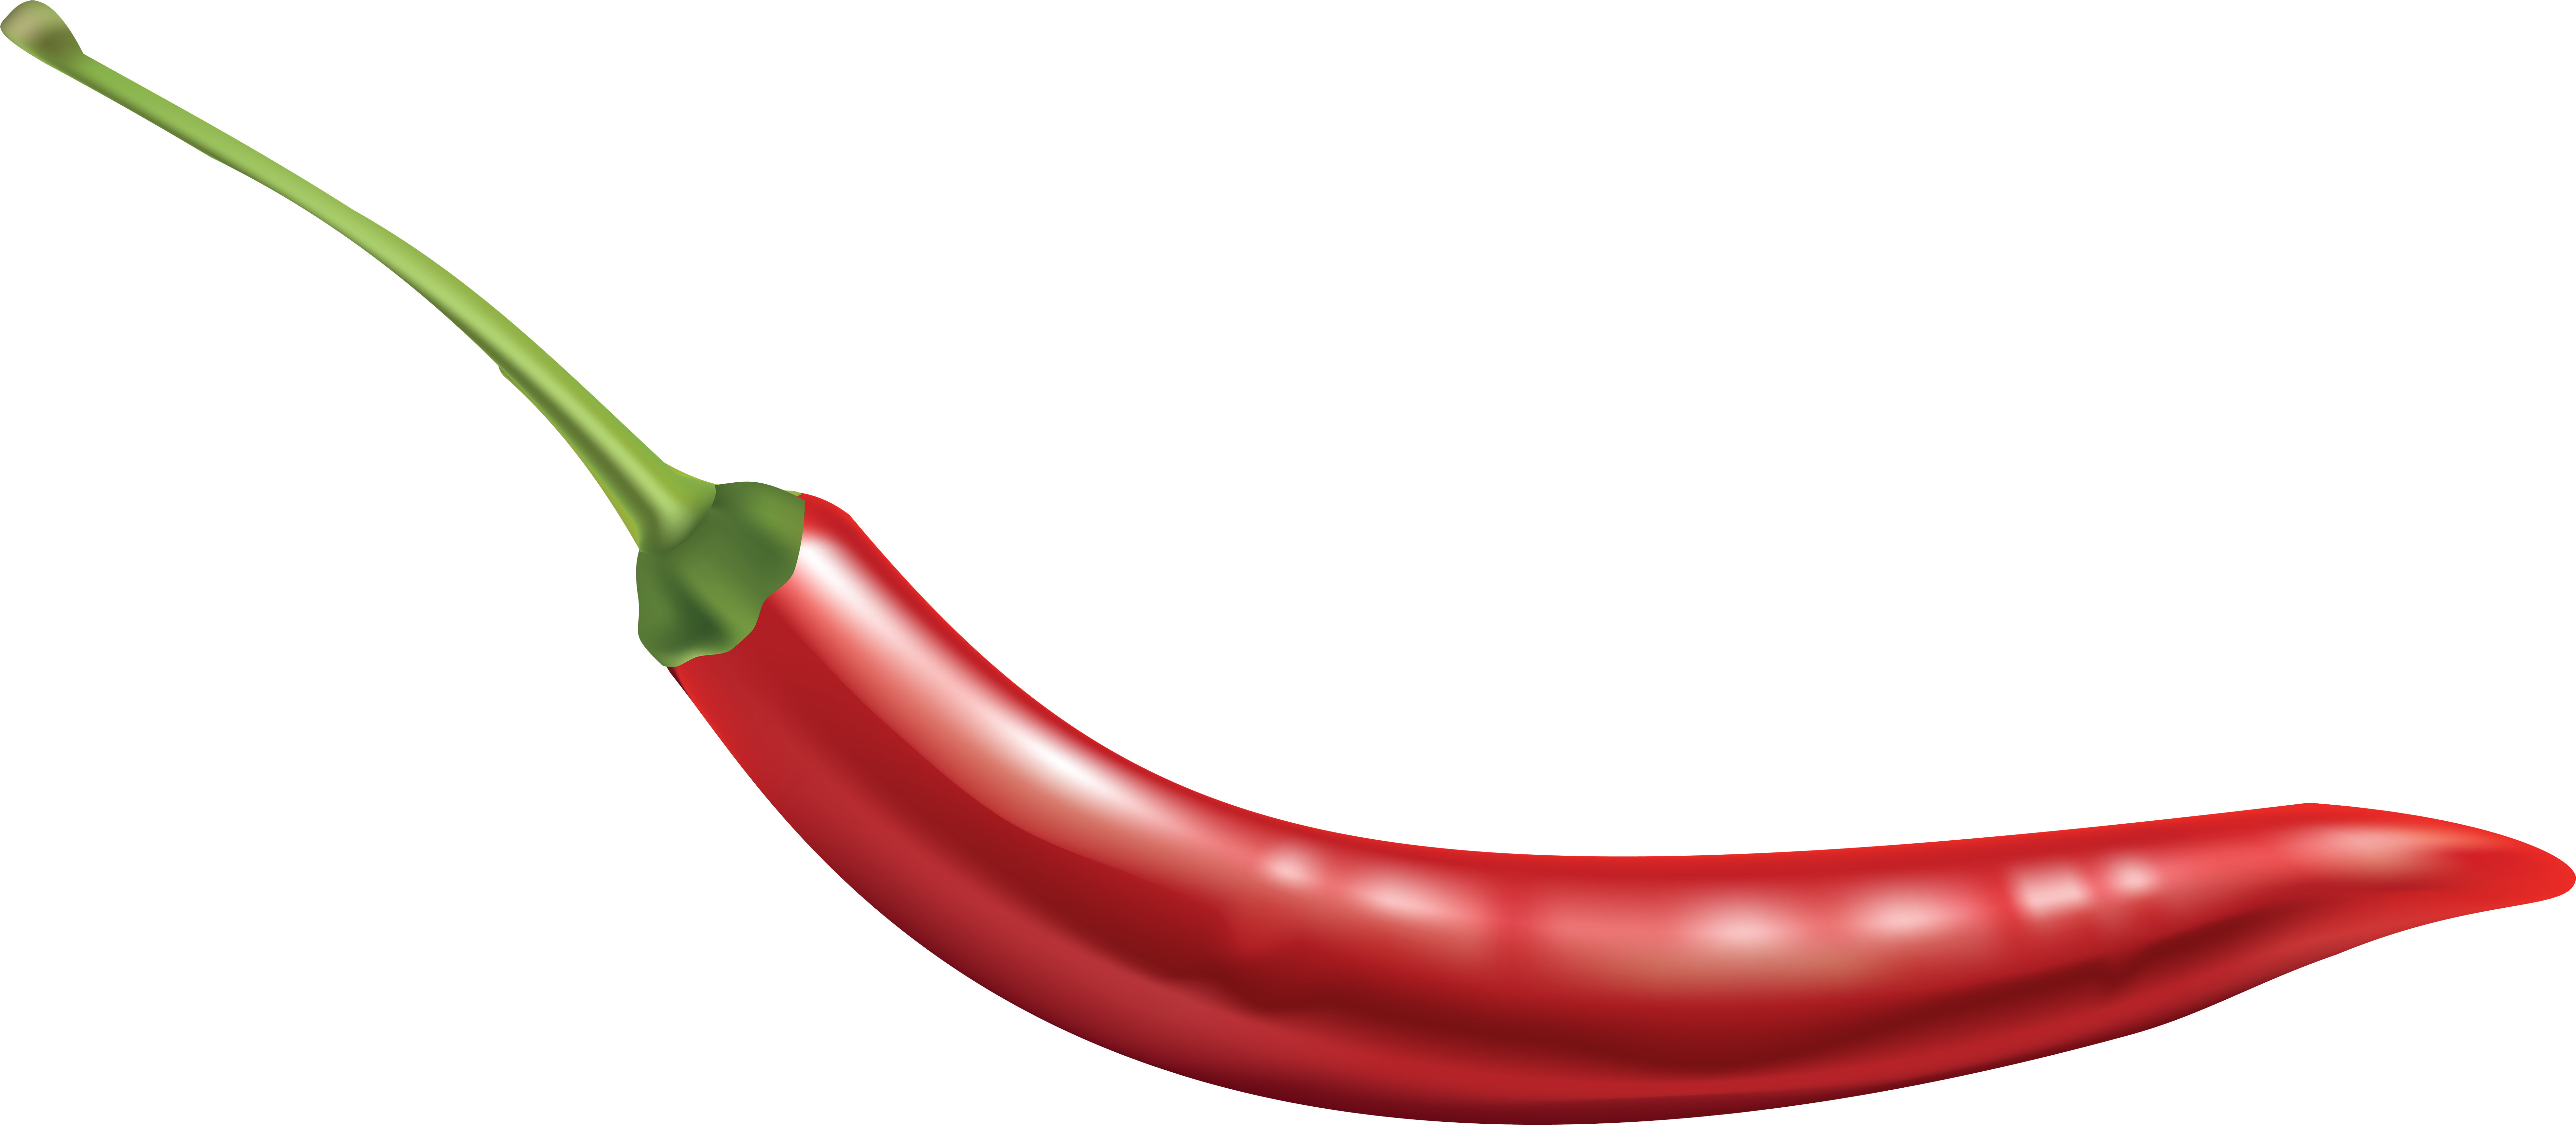 Red Chili Pepper Free Png Clip Art Image - Chili Peppers Transparent Background (8000x3491)